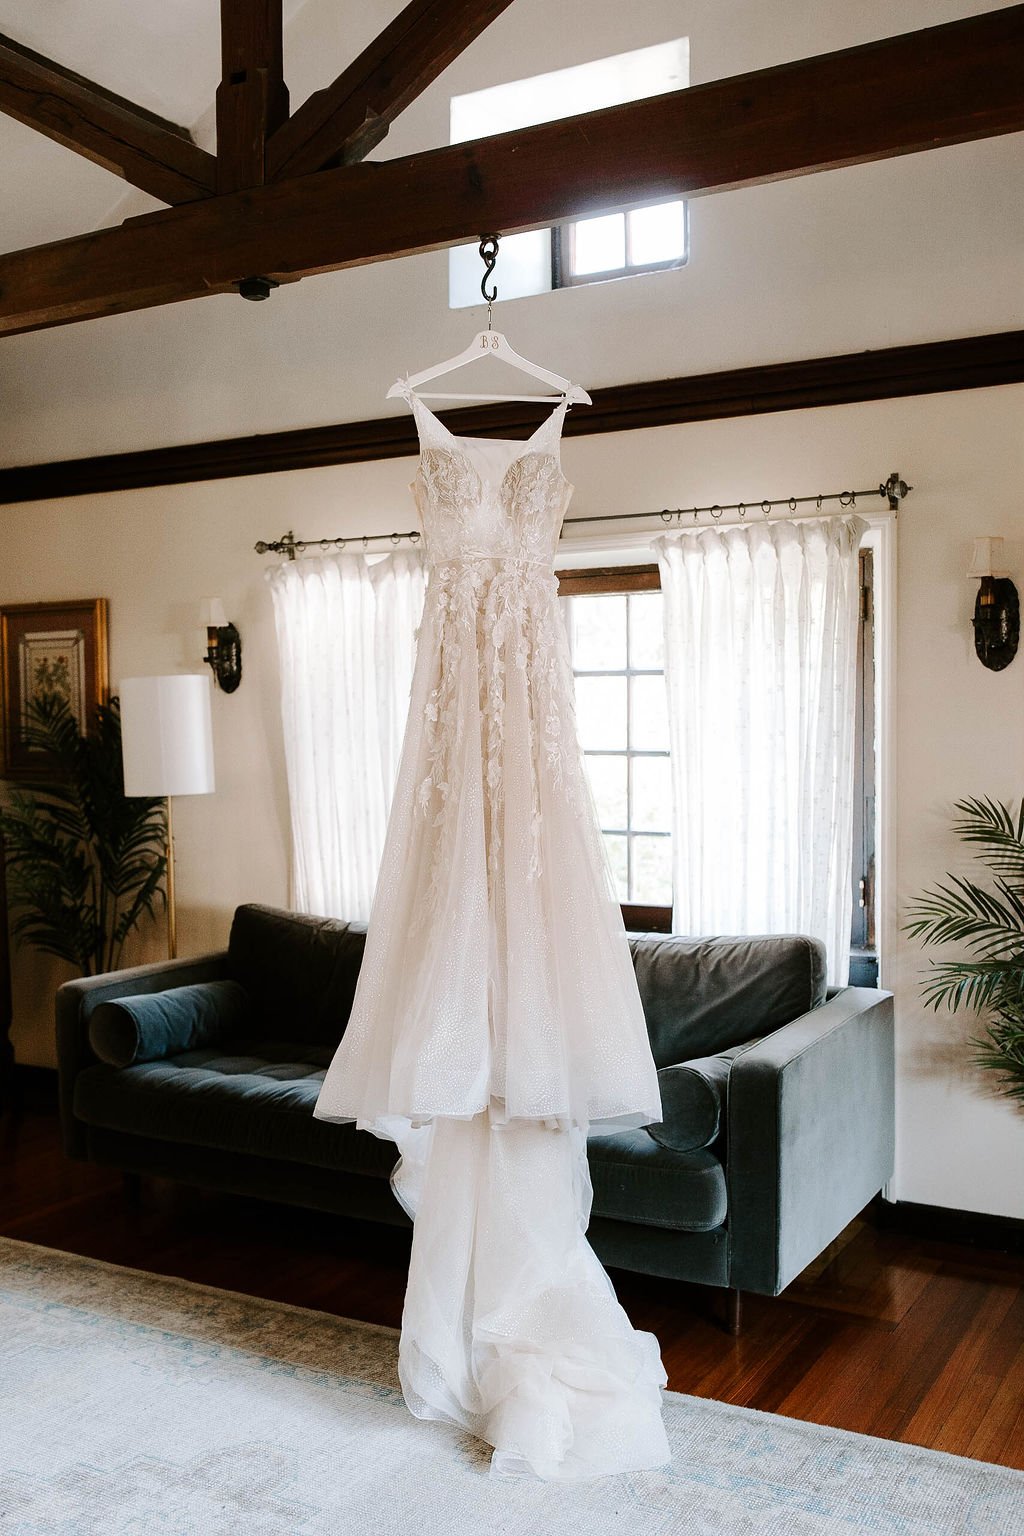 Lace wedding dress hanging from wooden beam